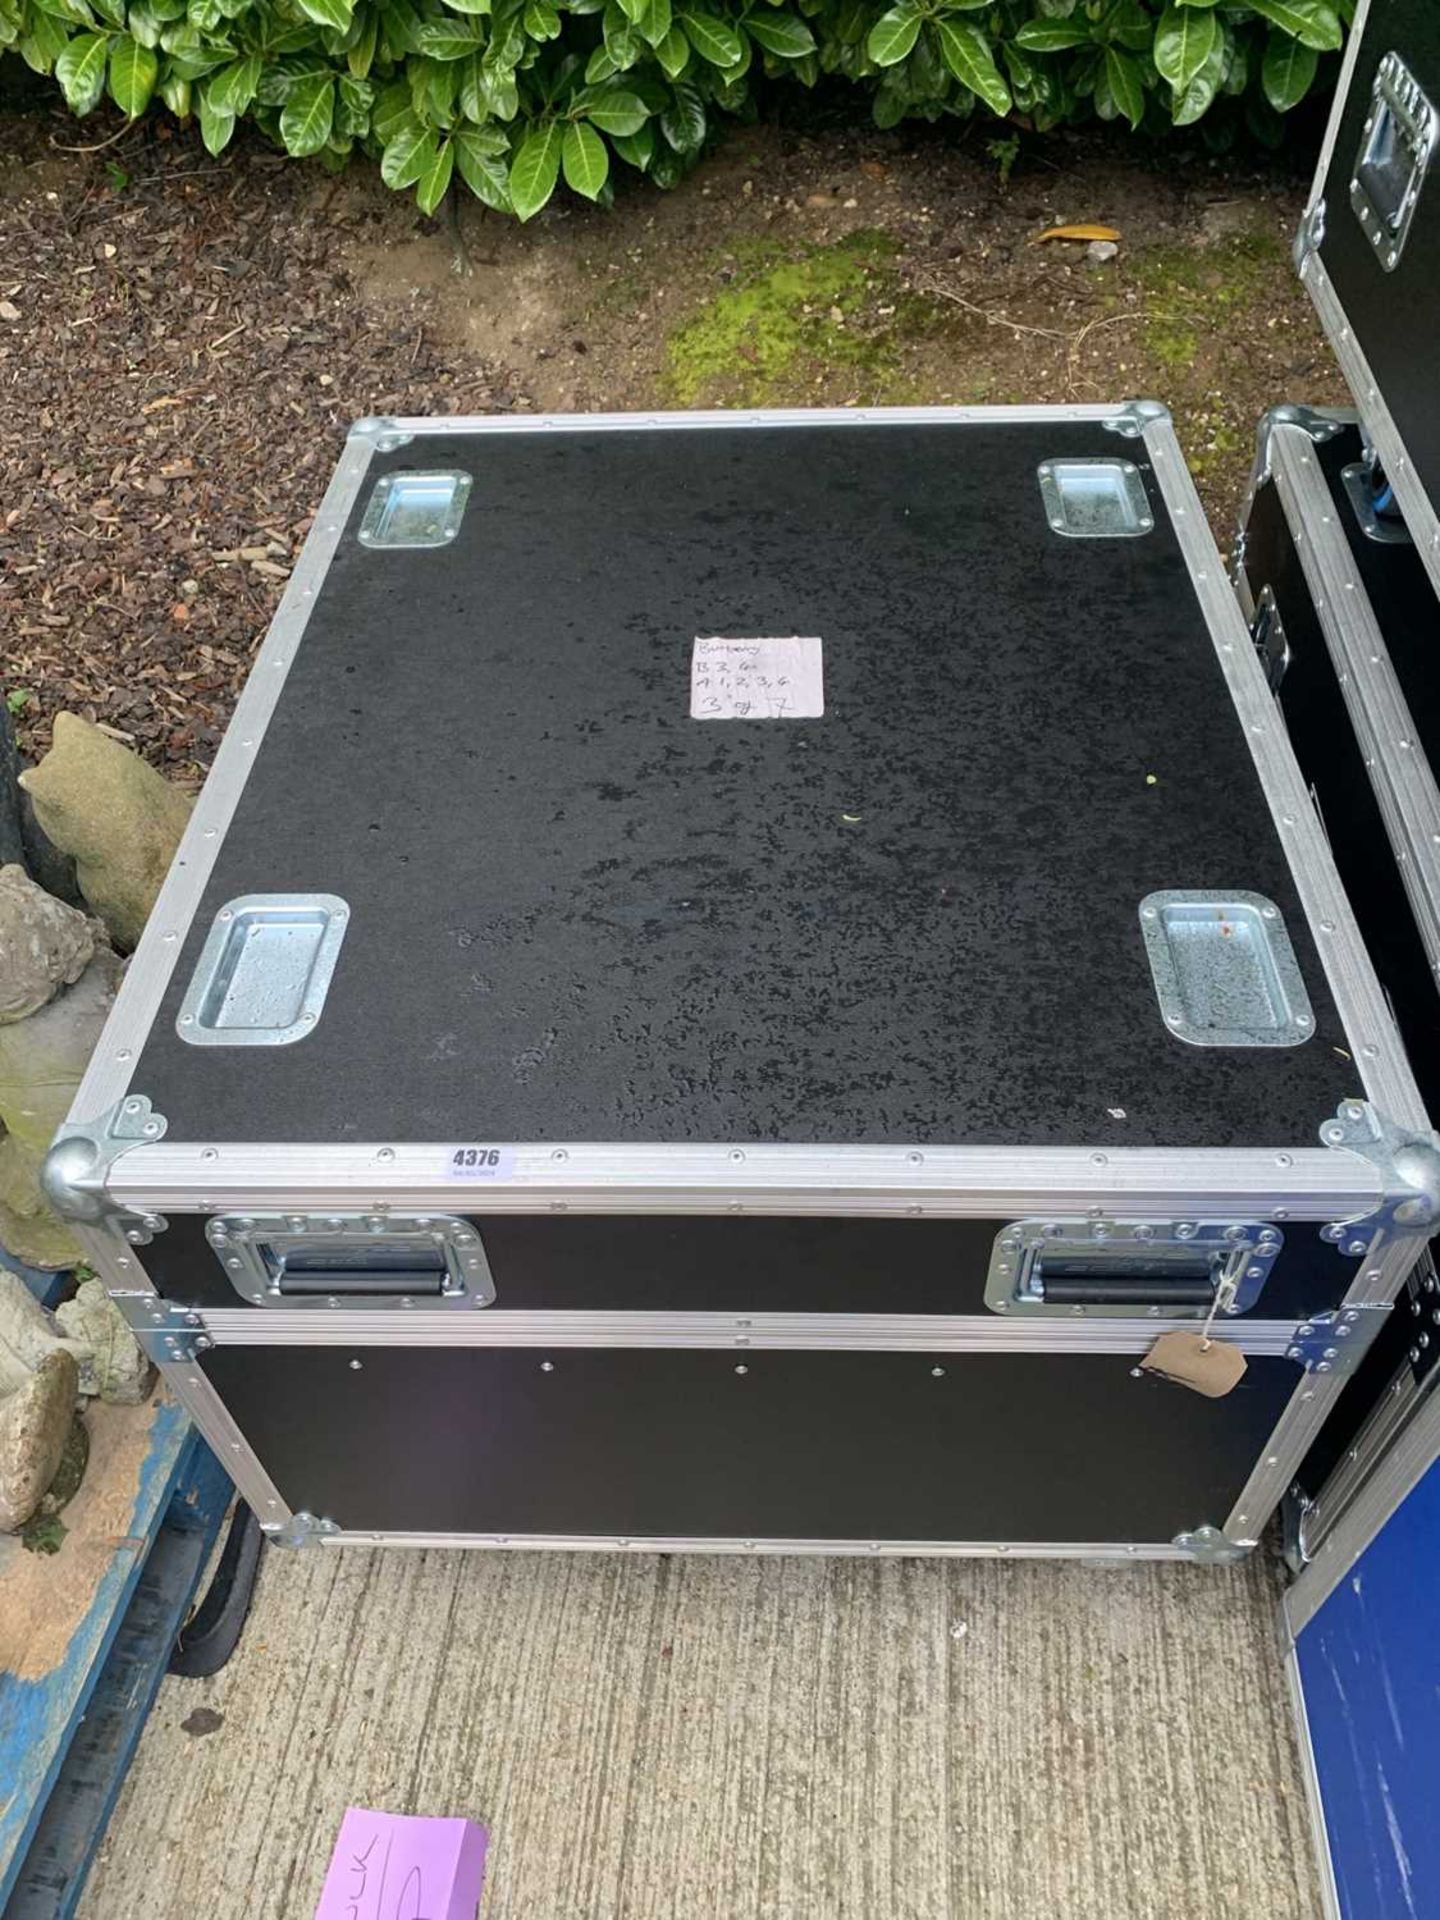 3 black and silver wheeled flight cases